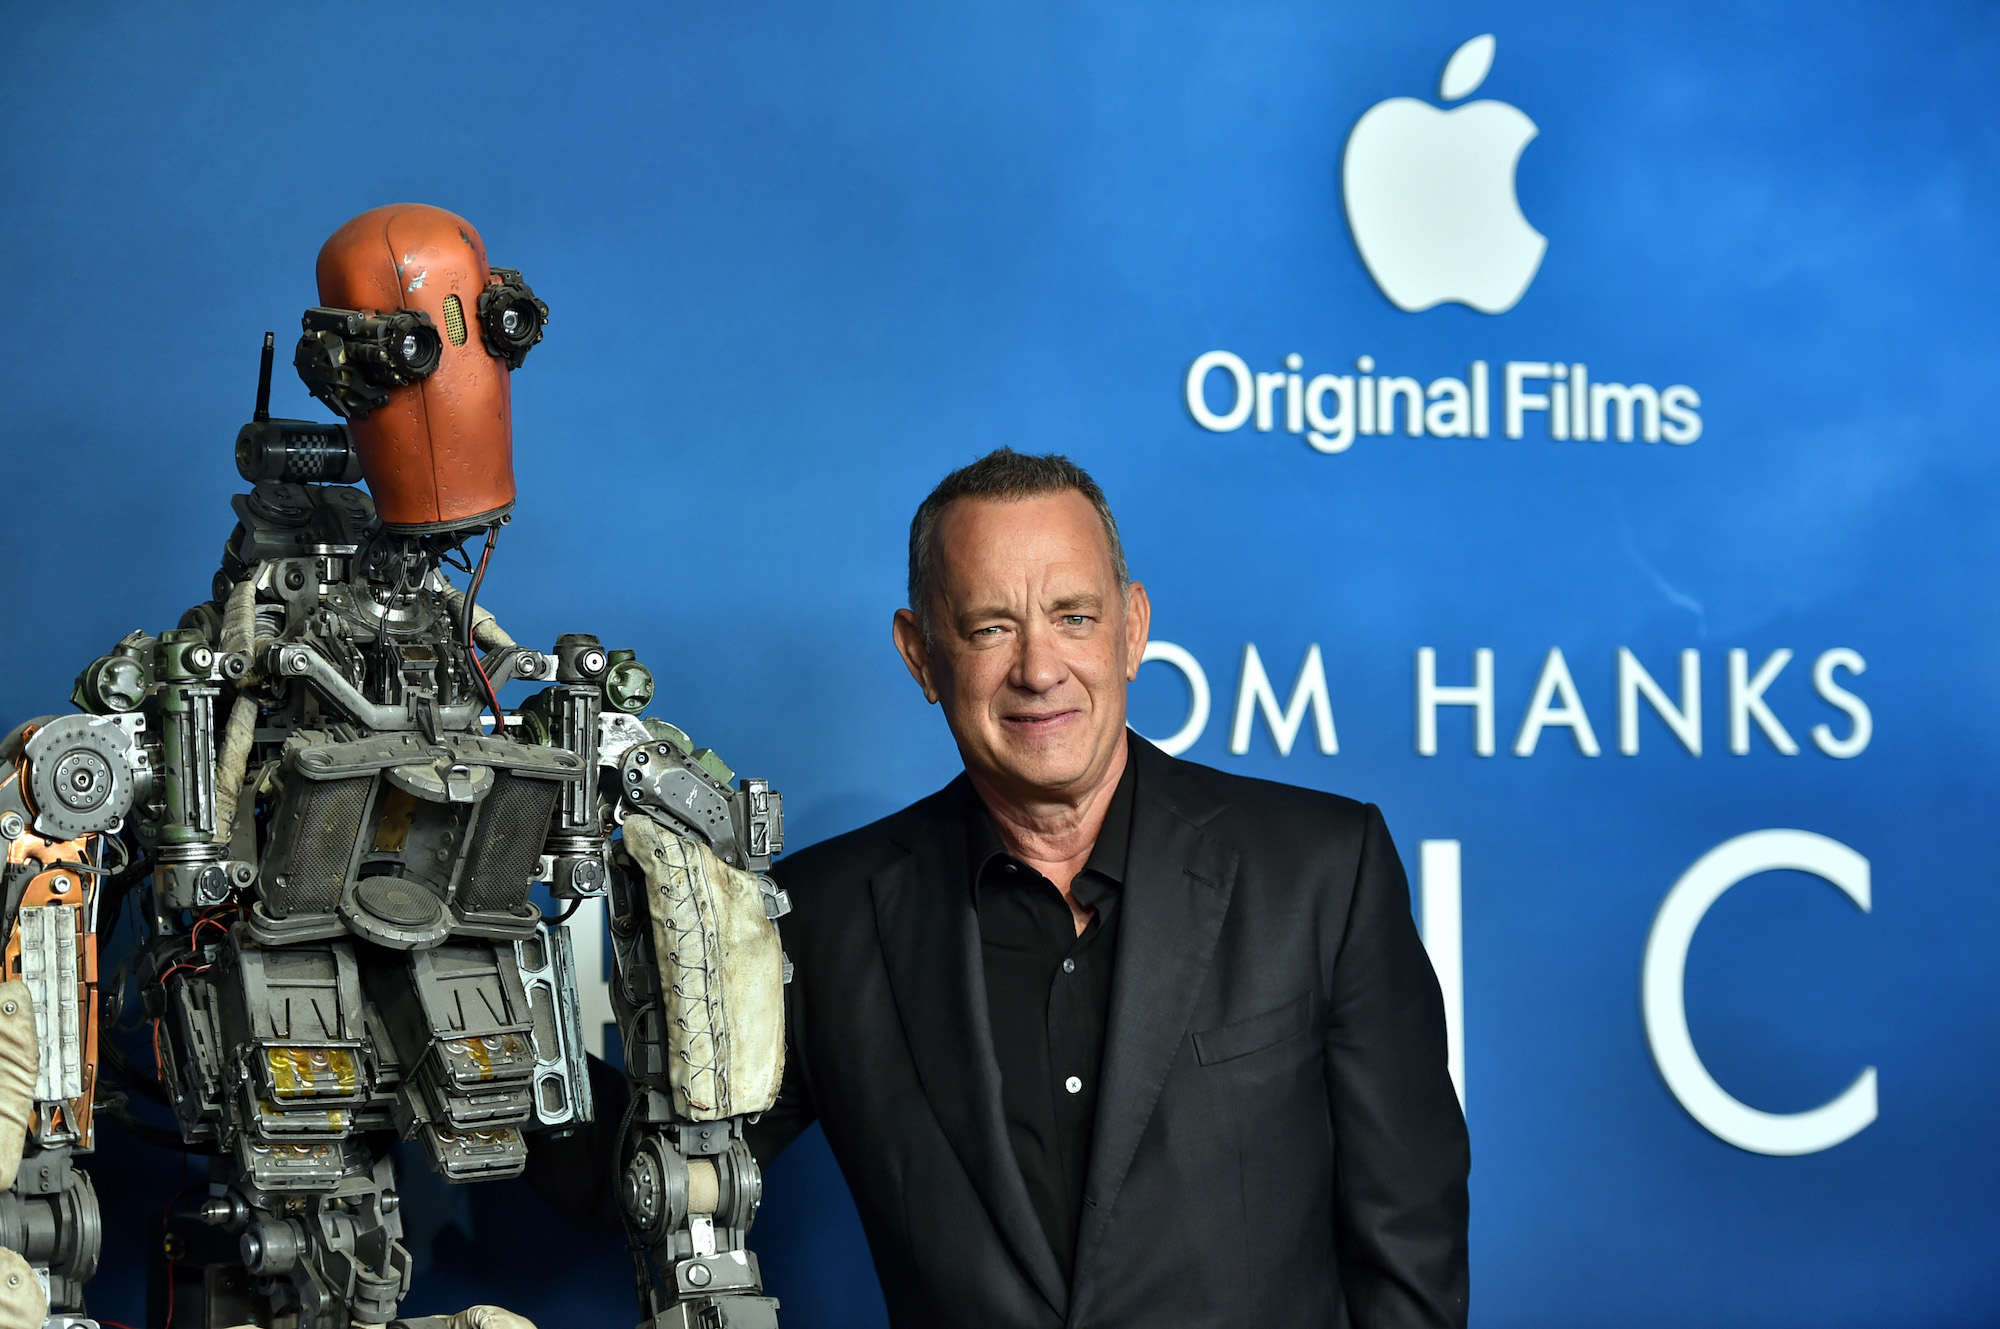 Tom Hanks streaming premiere of 'Finch': Hanks poses with robot